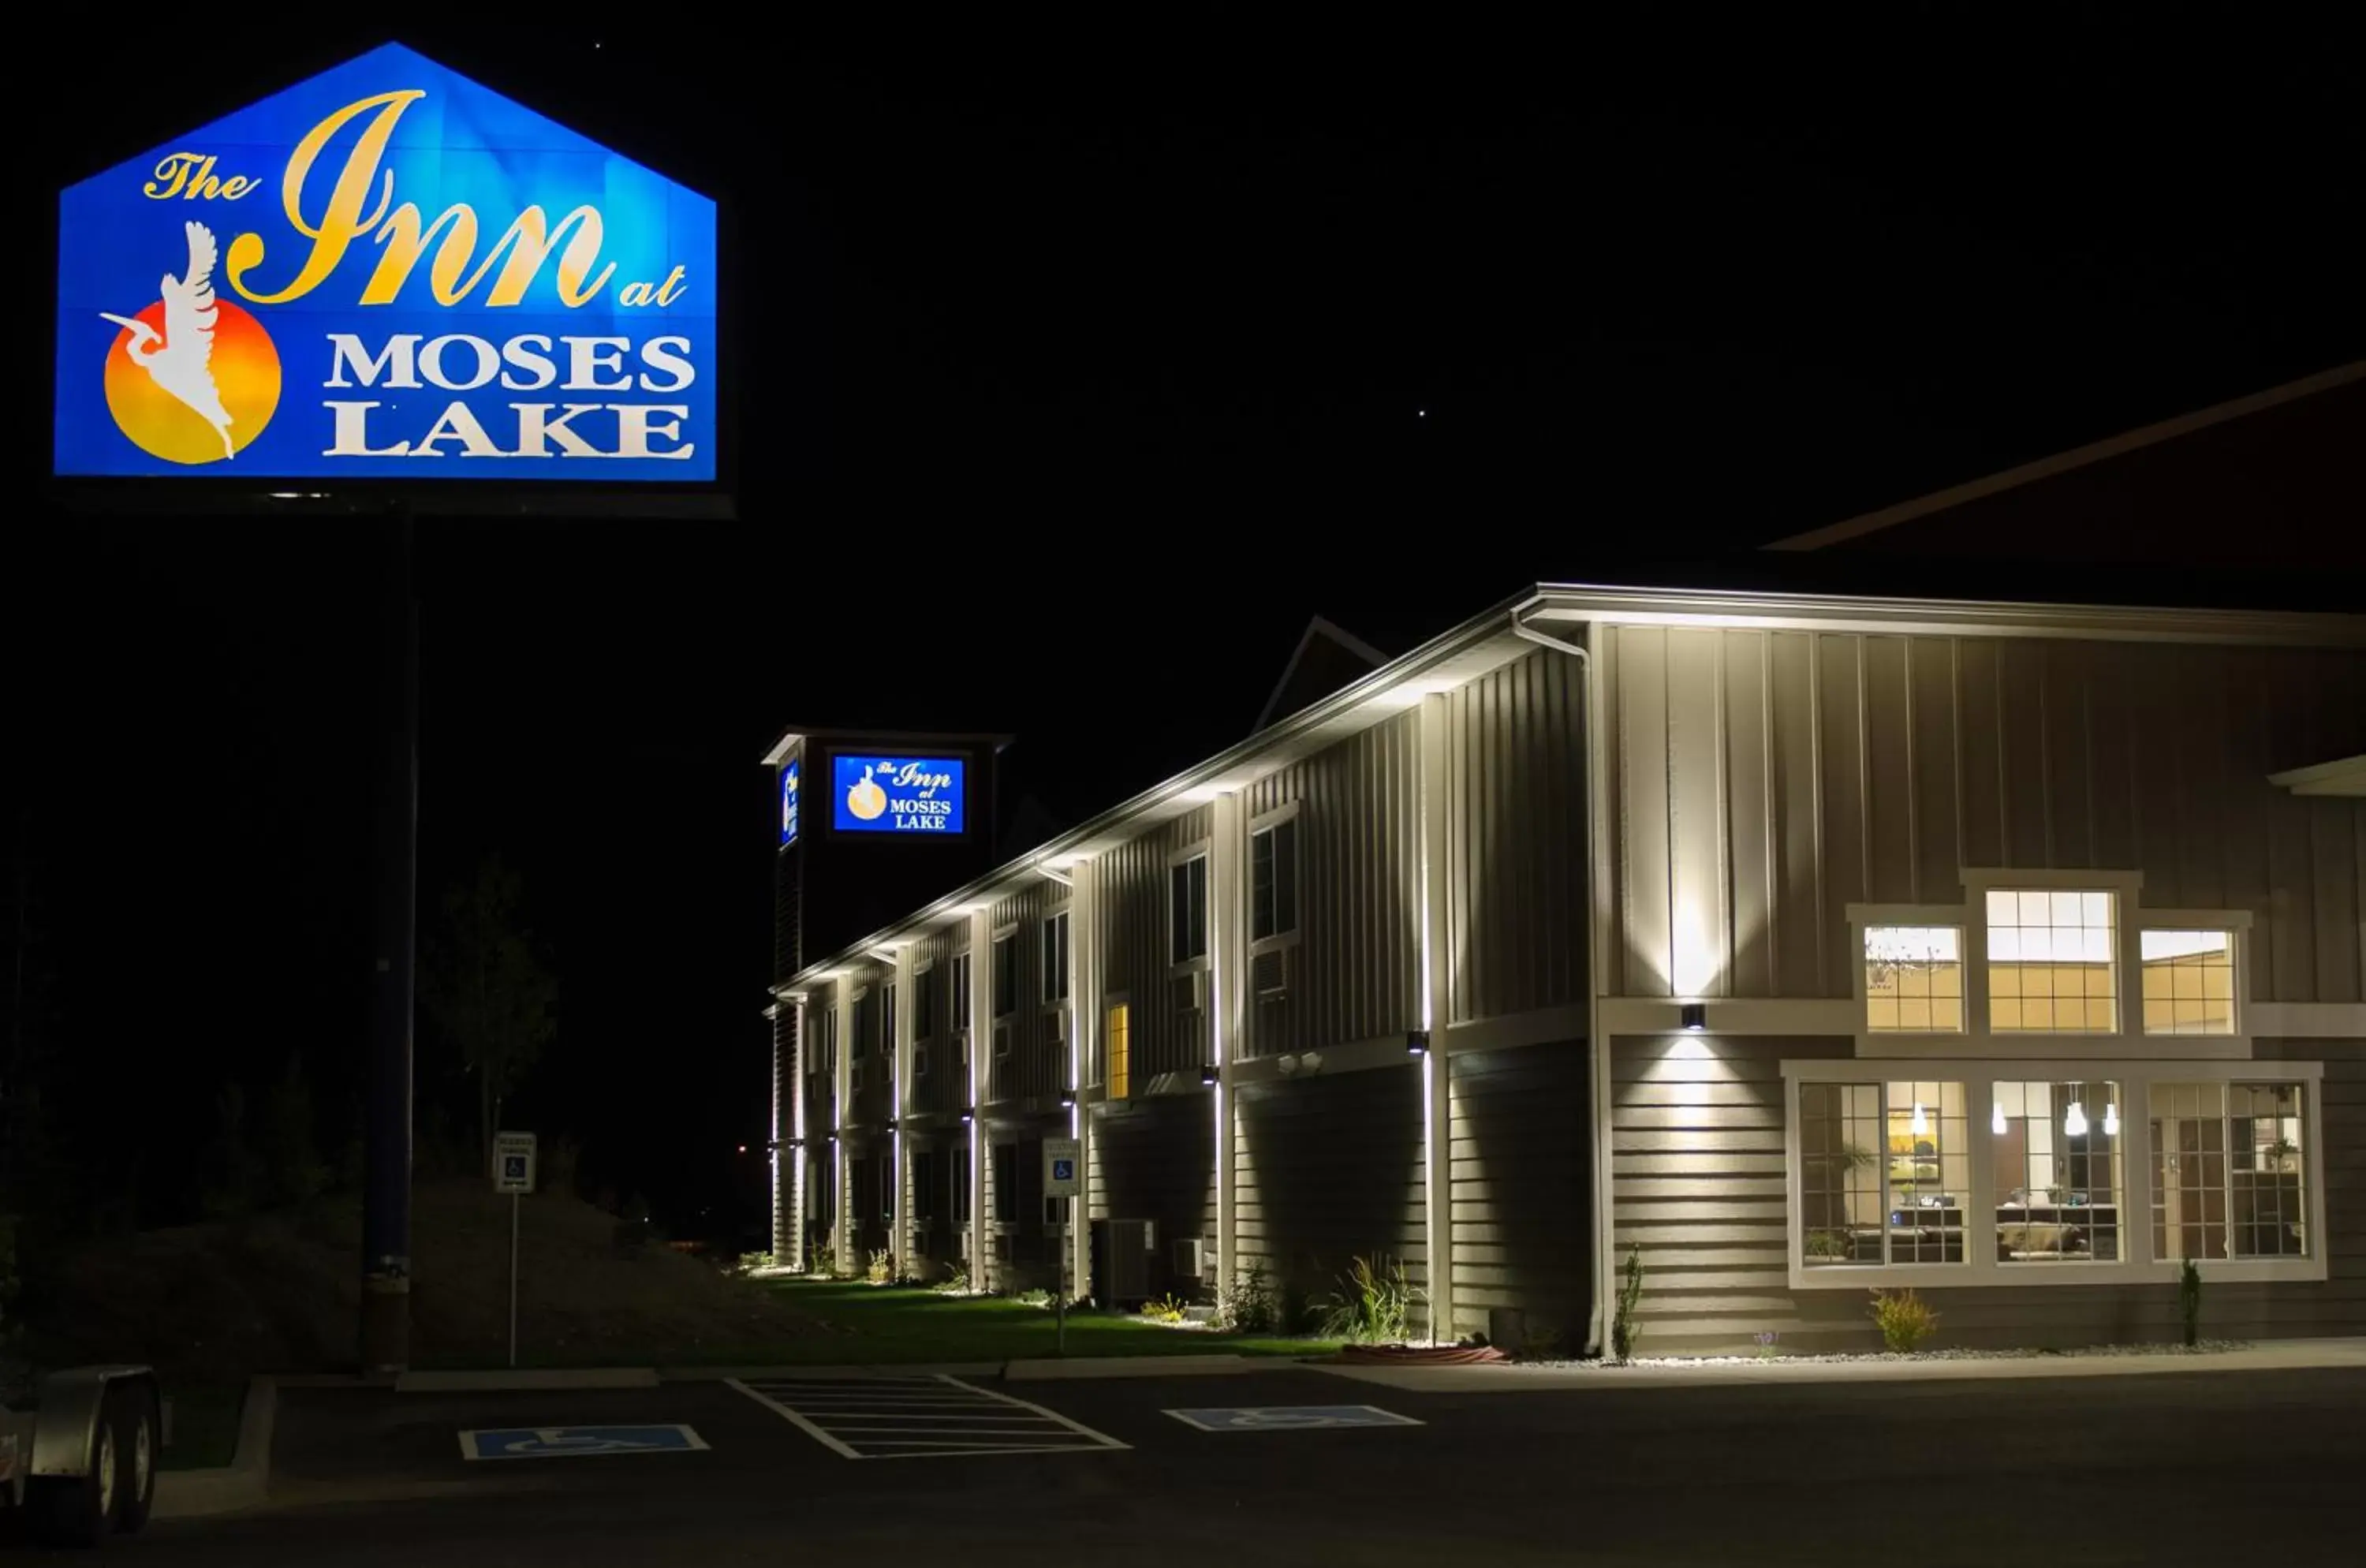 Property Building in Inn at Moses Lake